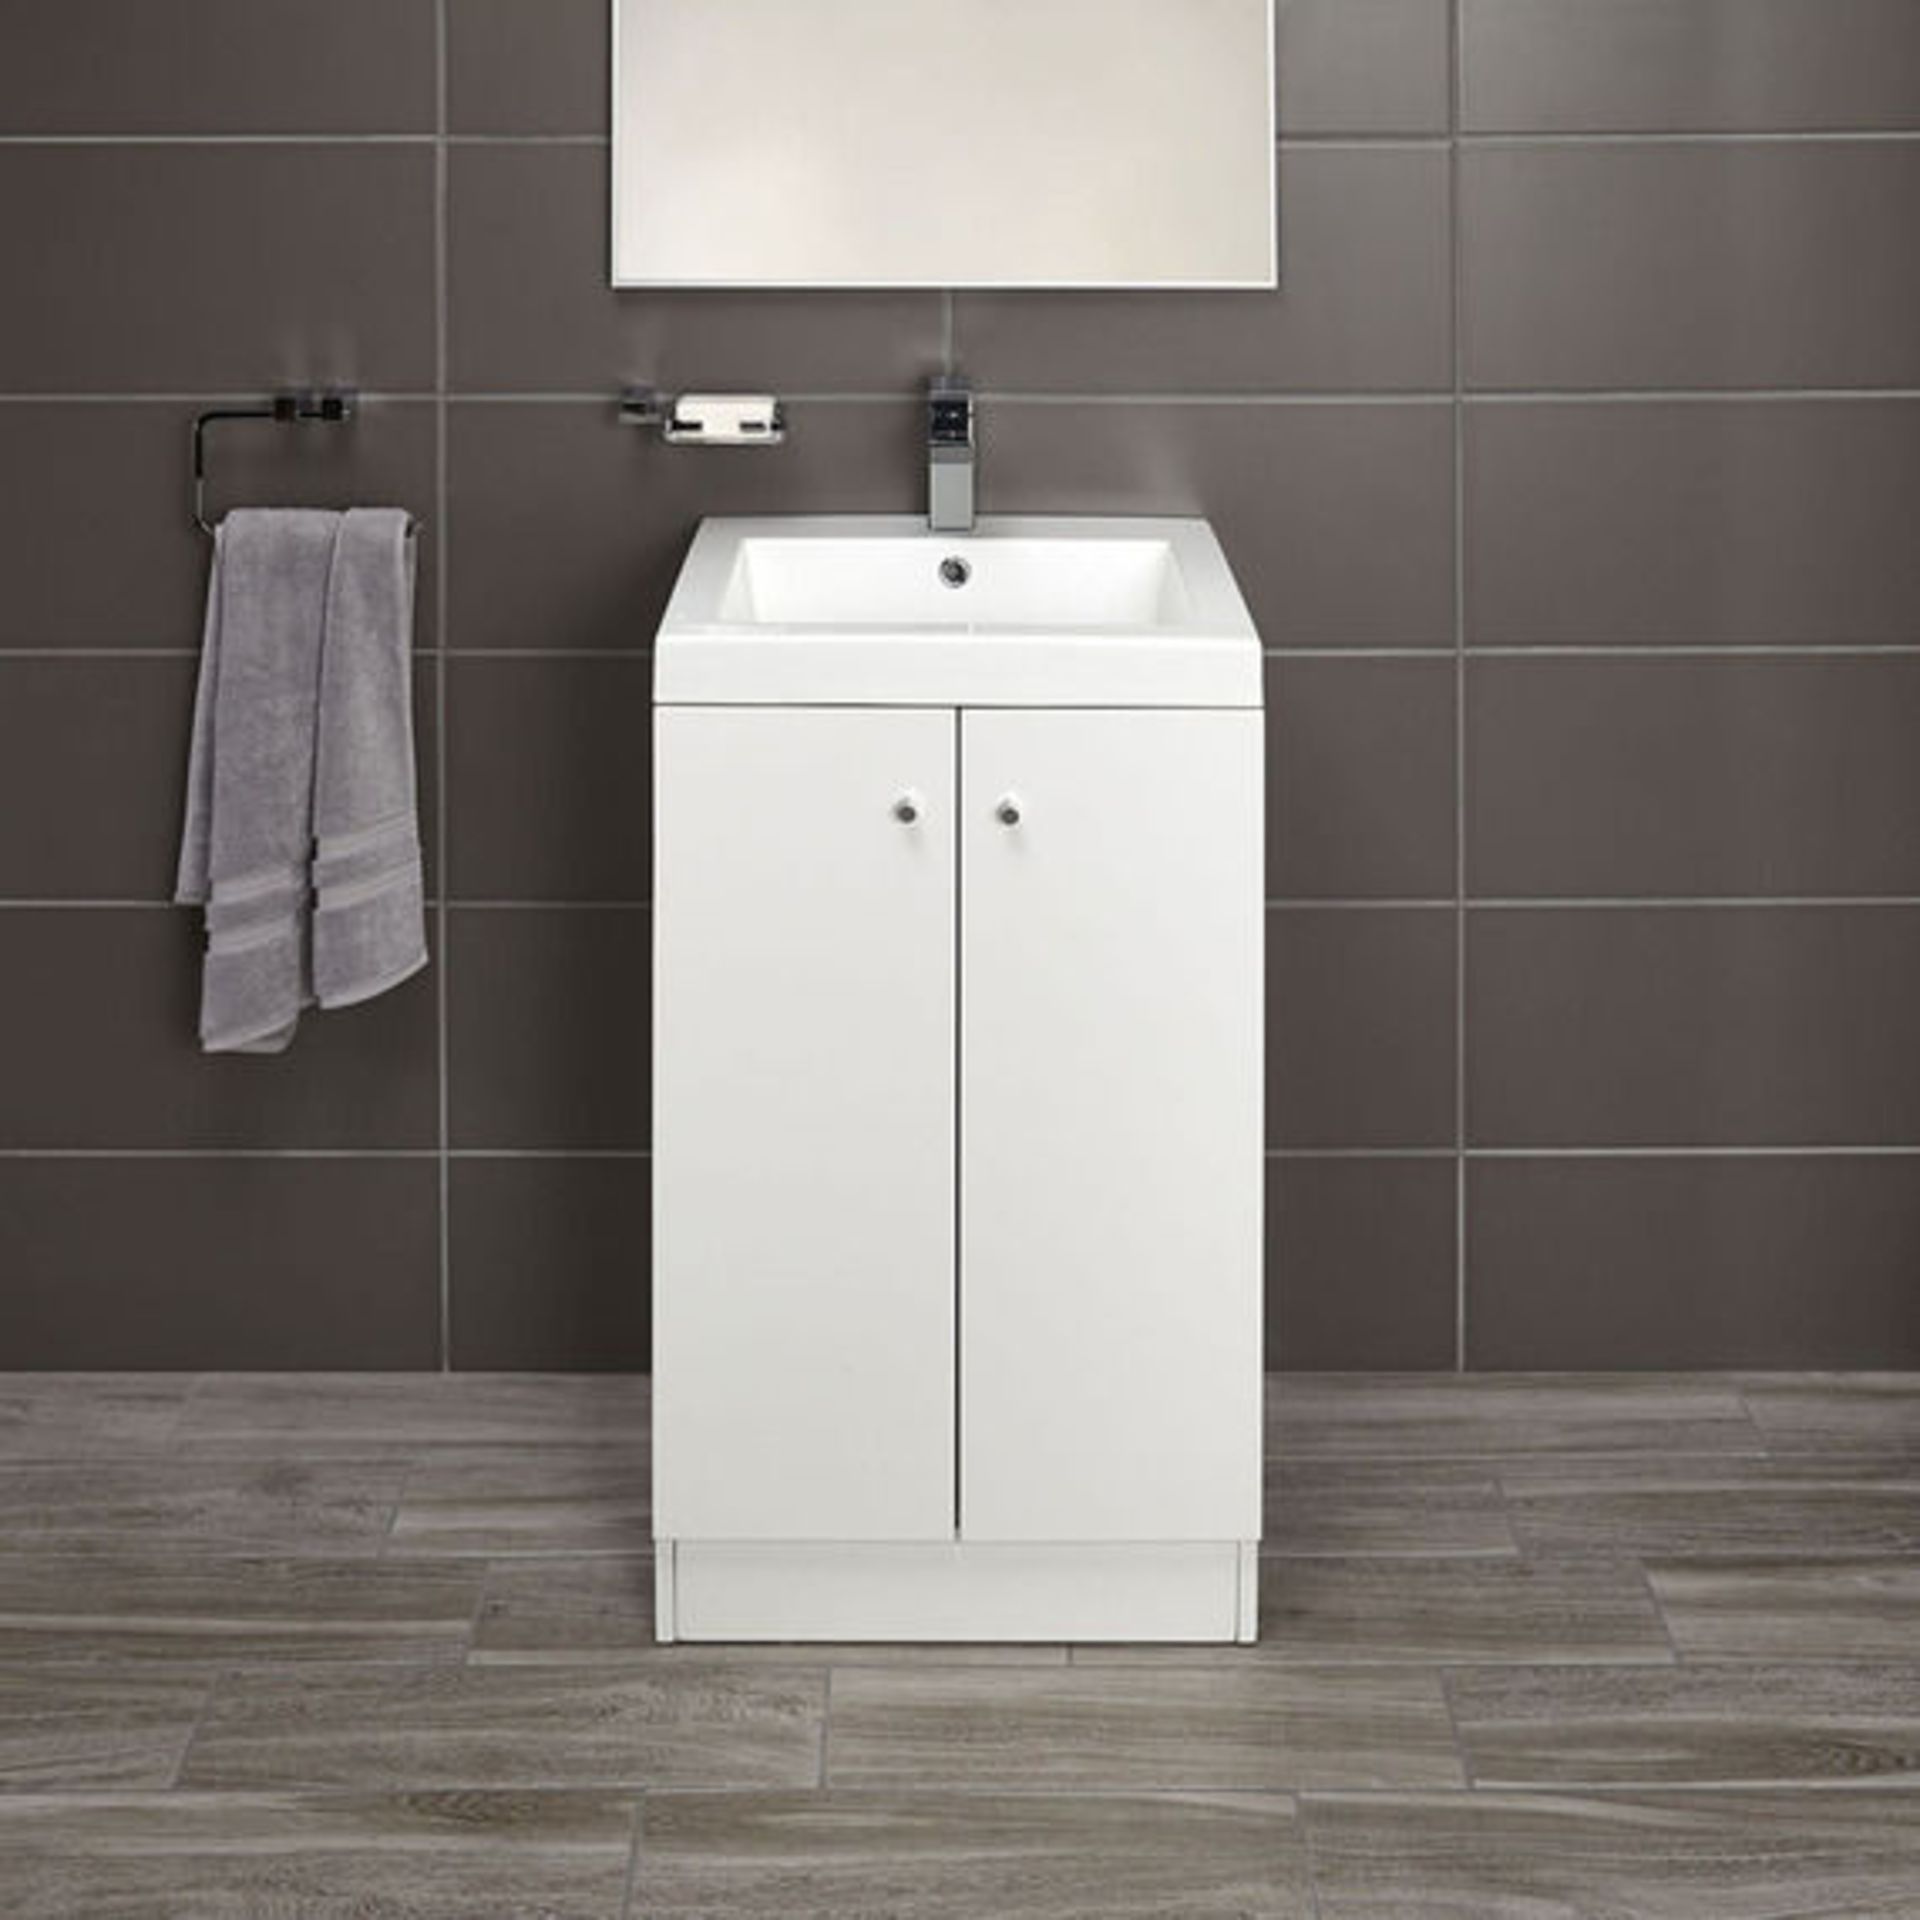 10 x Alpine Duo 500 Floor Standing Vanity unit - Gloss White - Brand New Boxed Stock - Dimensions: - Image 3 of 5